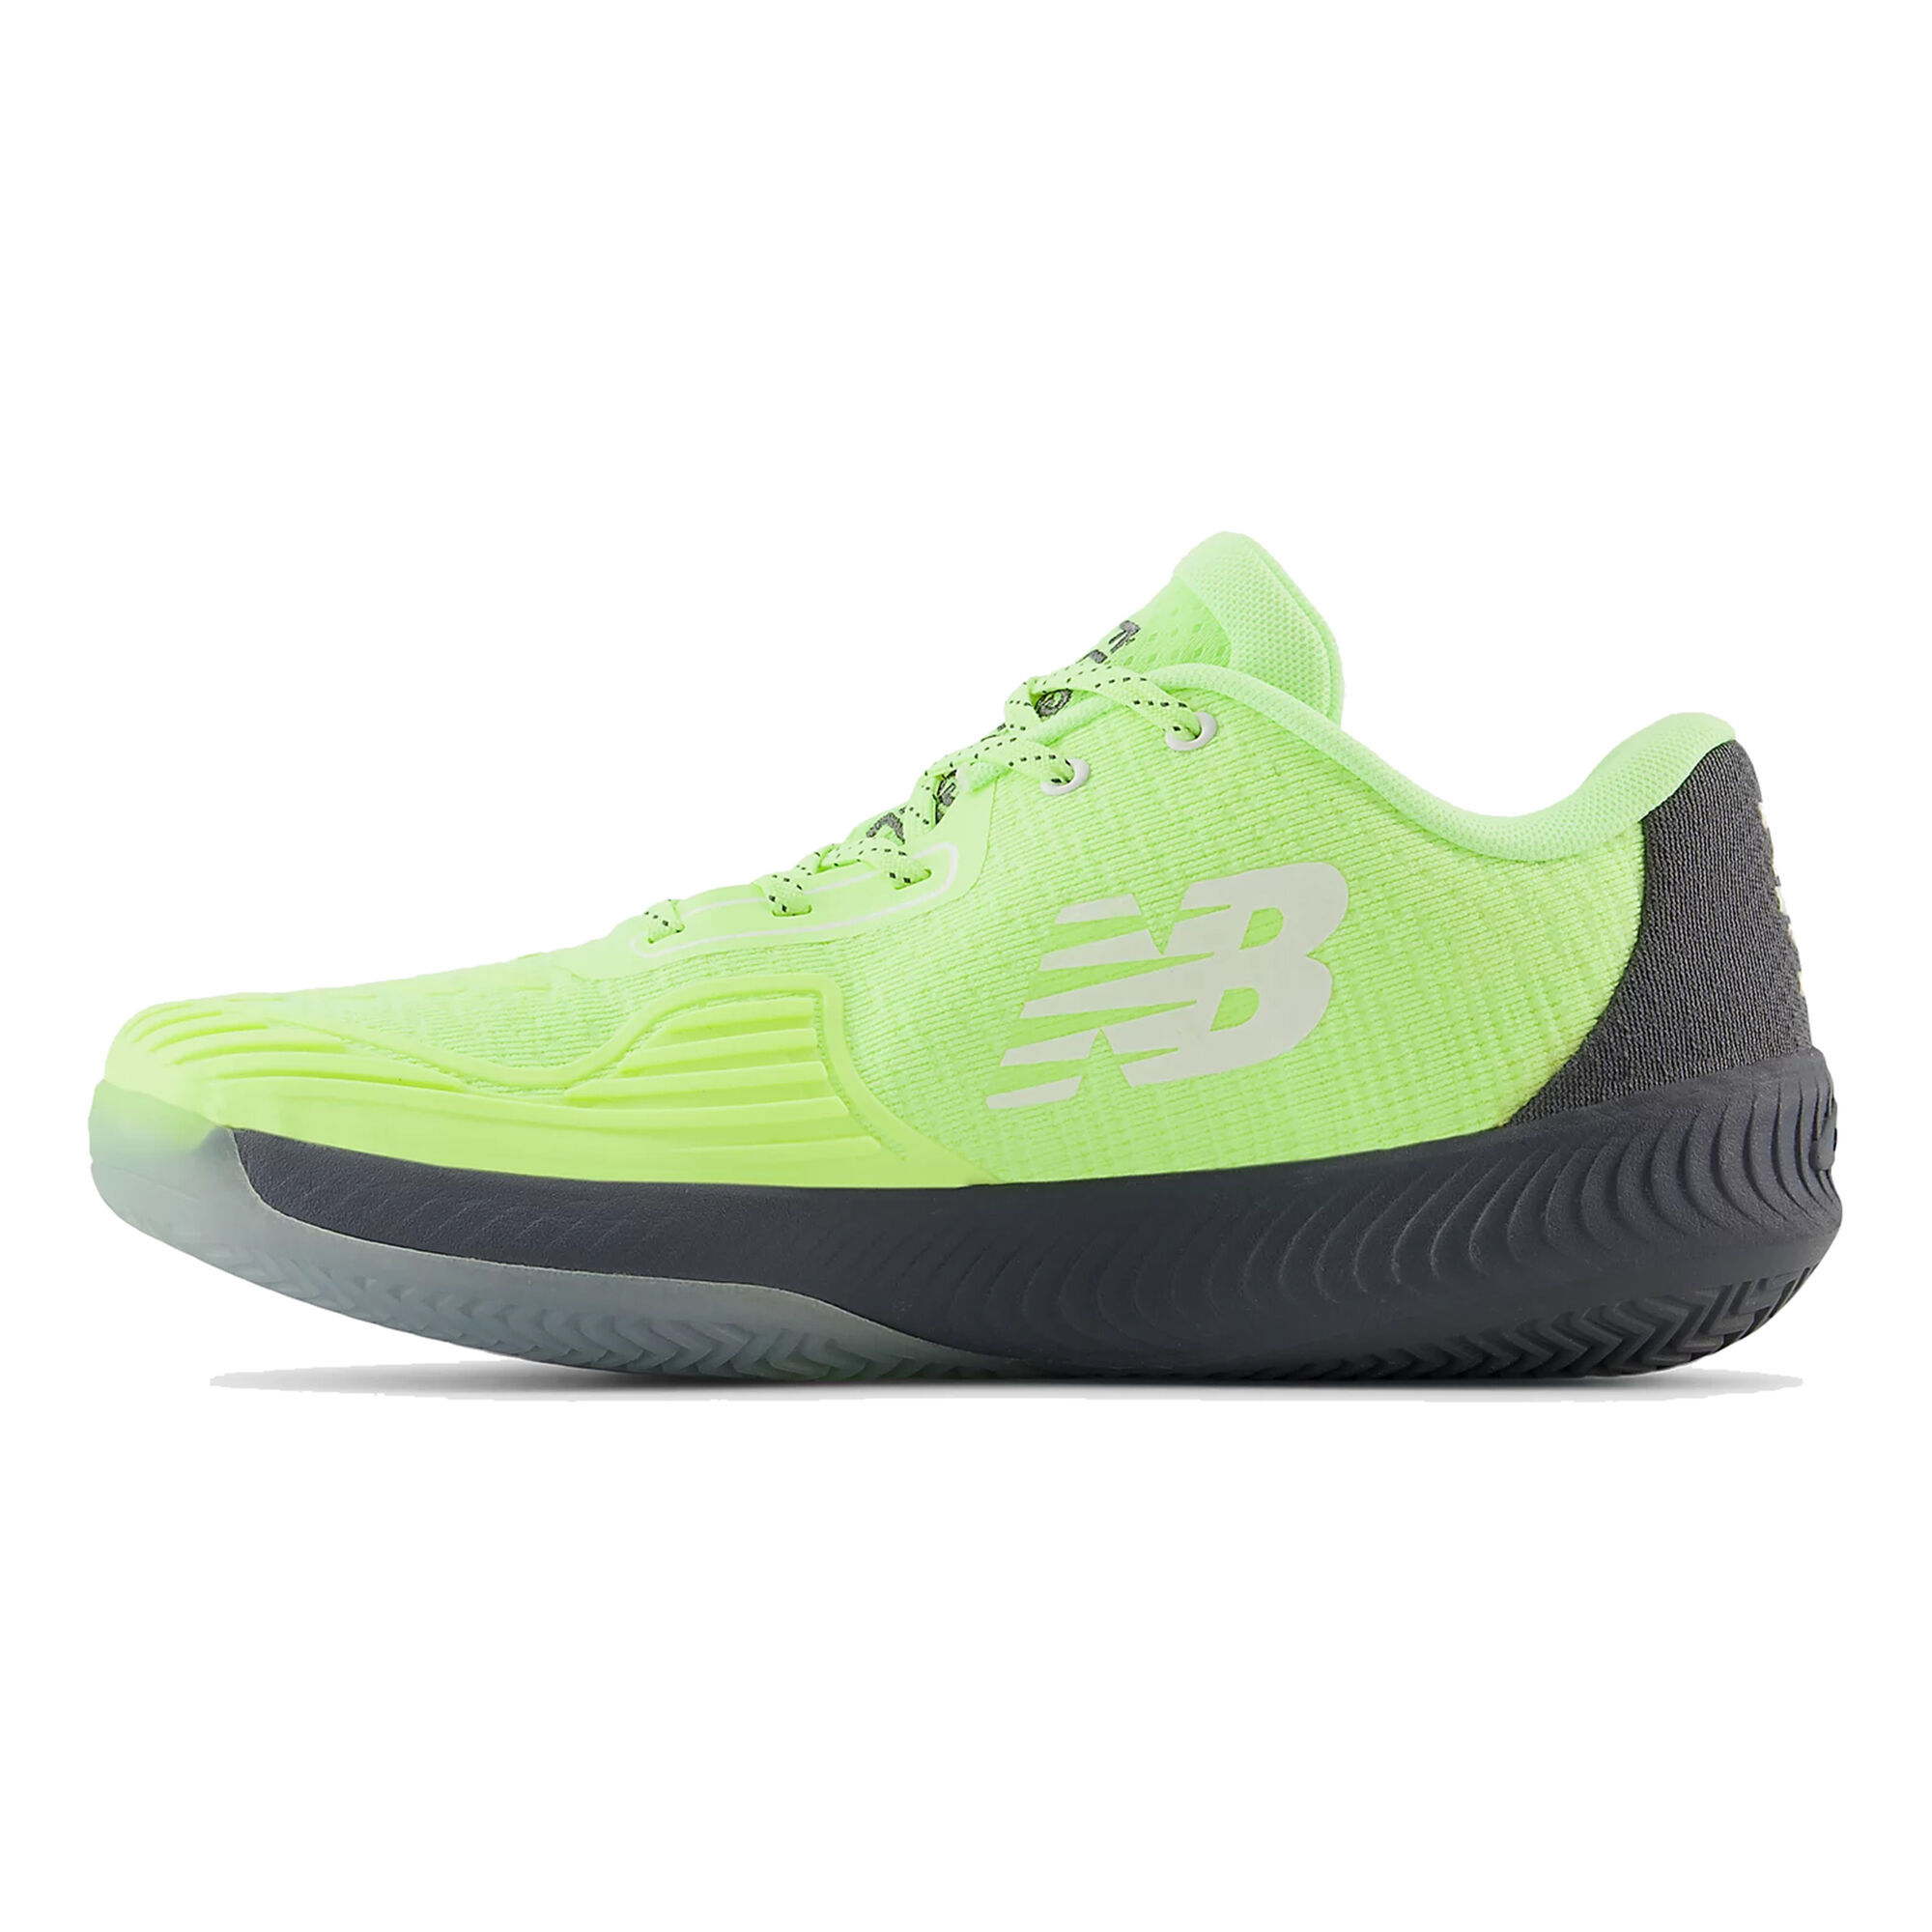 Shoes T.Spin 23 clay man black fluorescent yellow